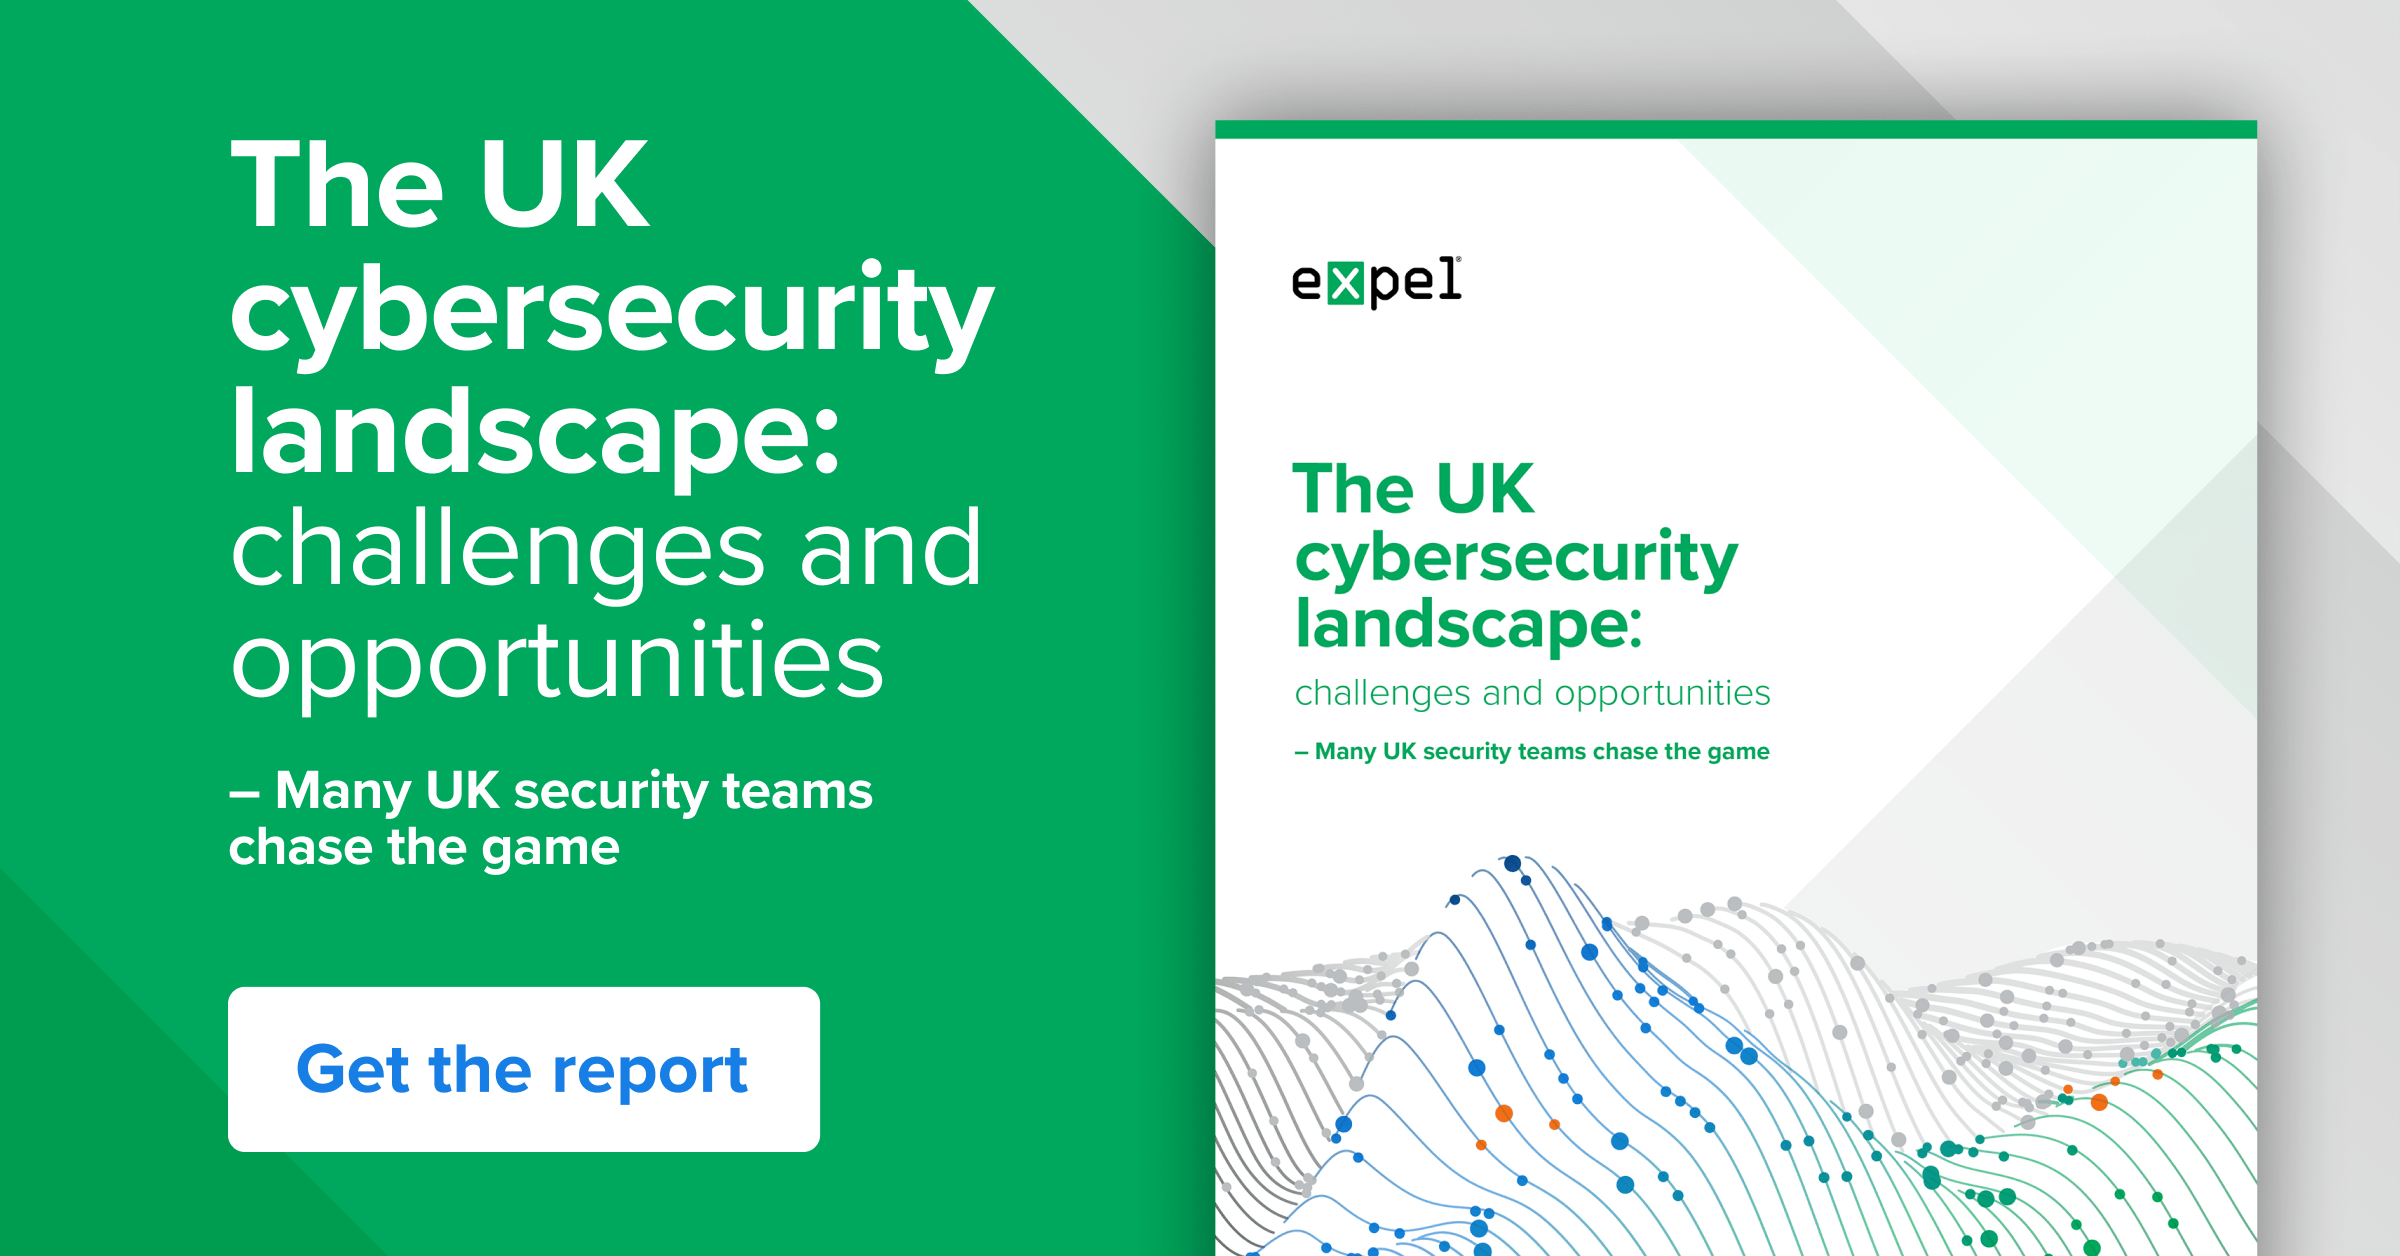 The UK cybersecurity landscape: challenges and opportunities